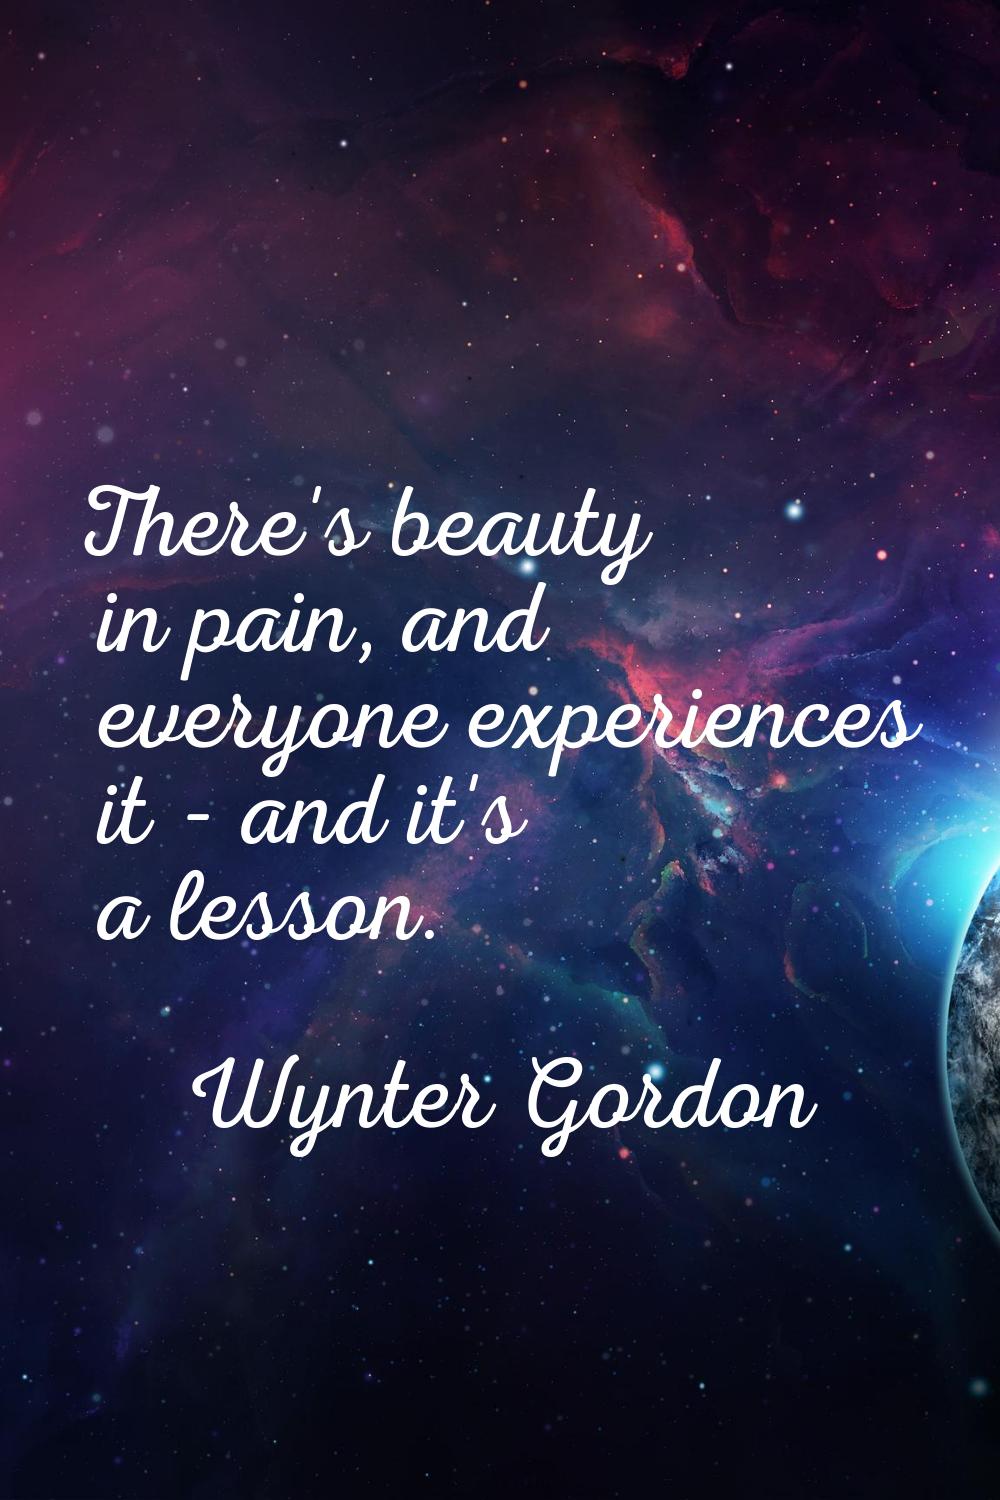 There's beauty in pain, and everyone experiences it - and it's a lesson.